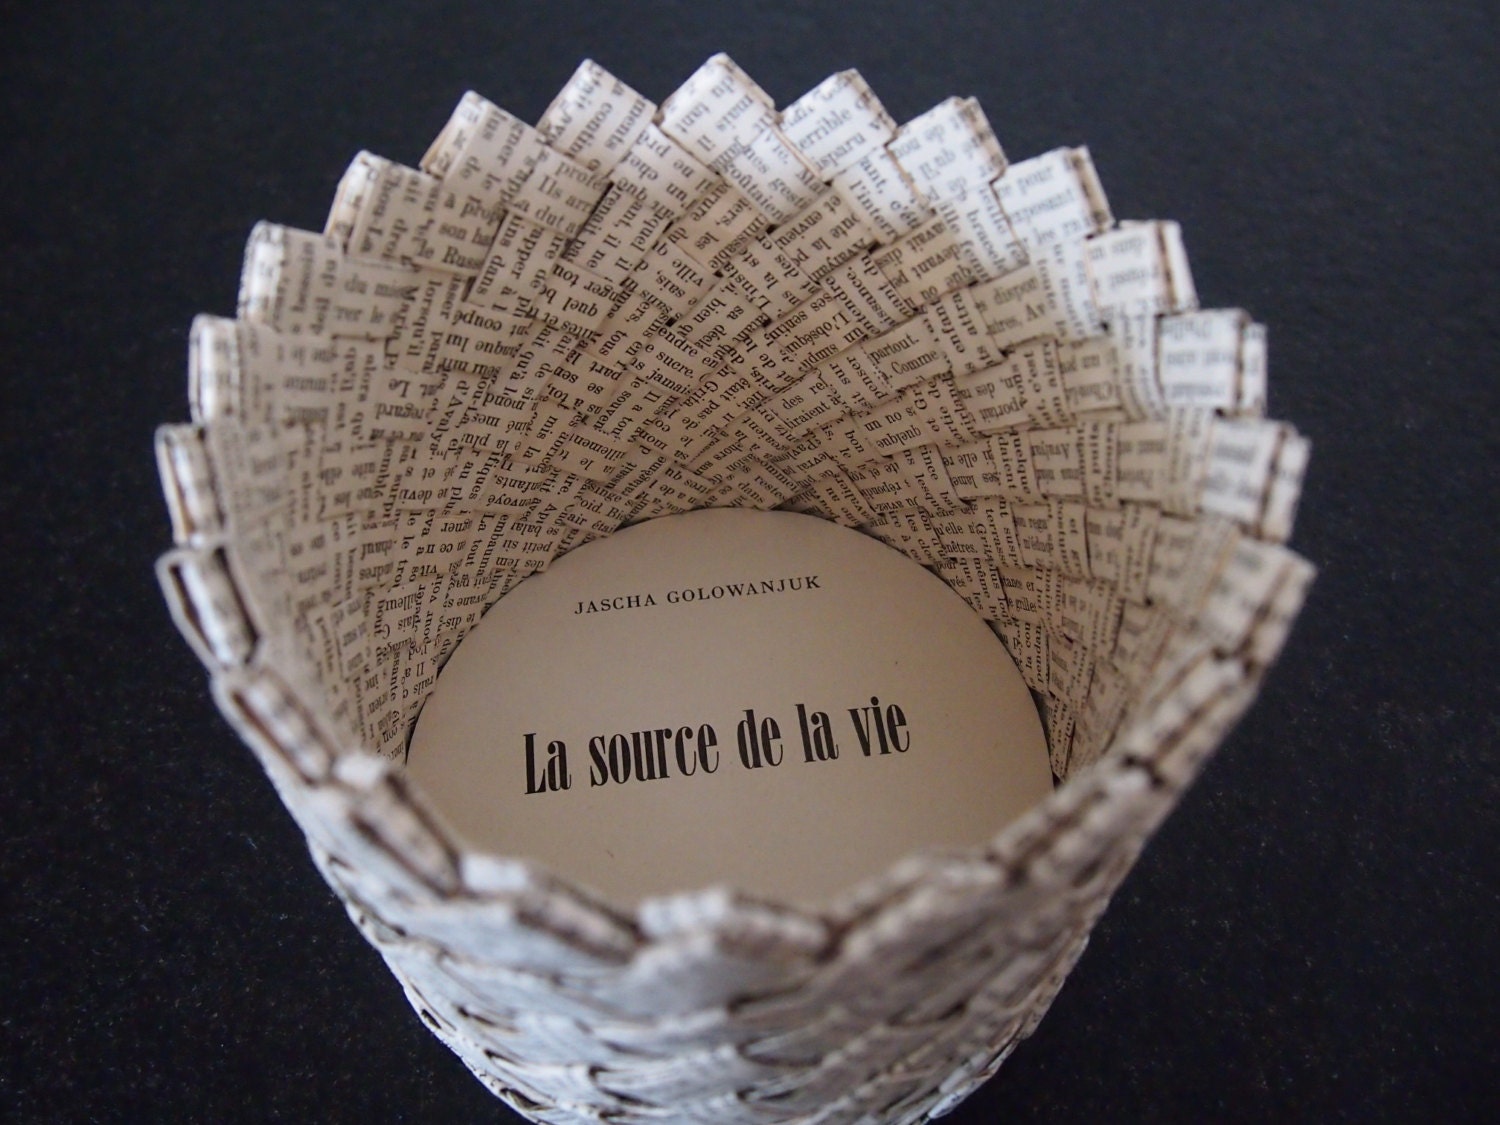 Paper storage basket woven from vintage book